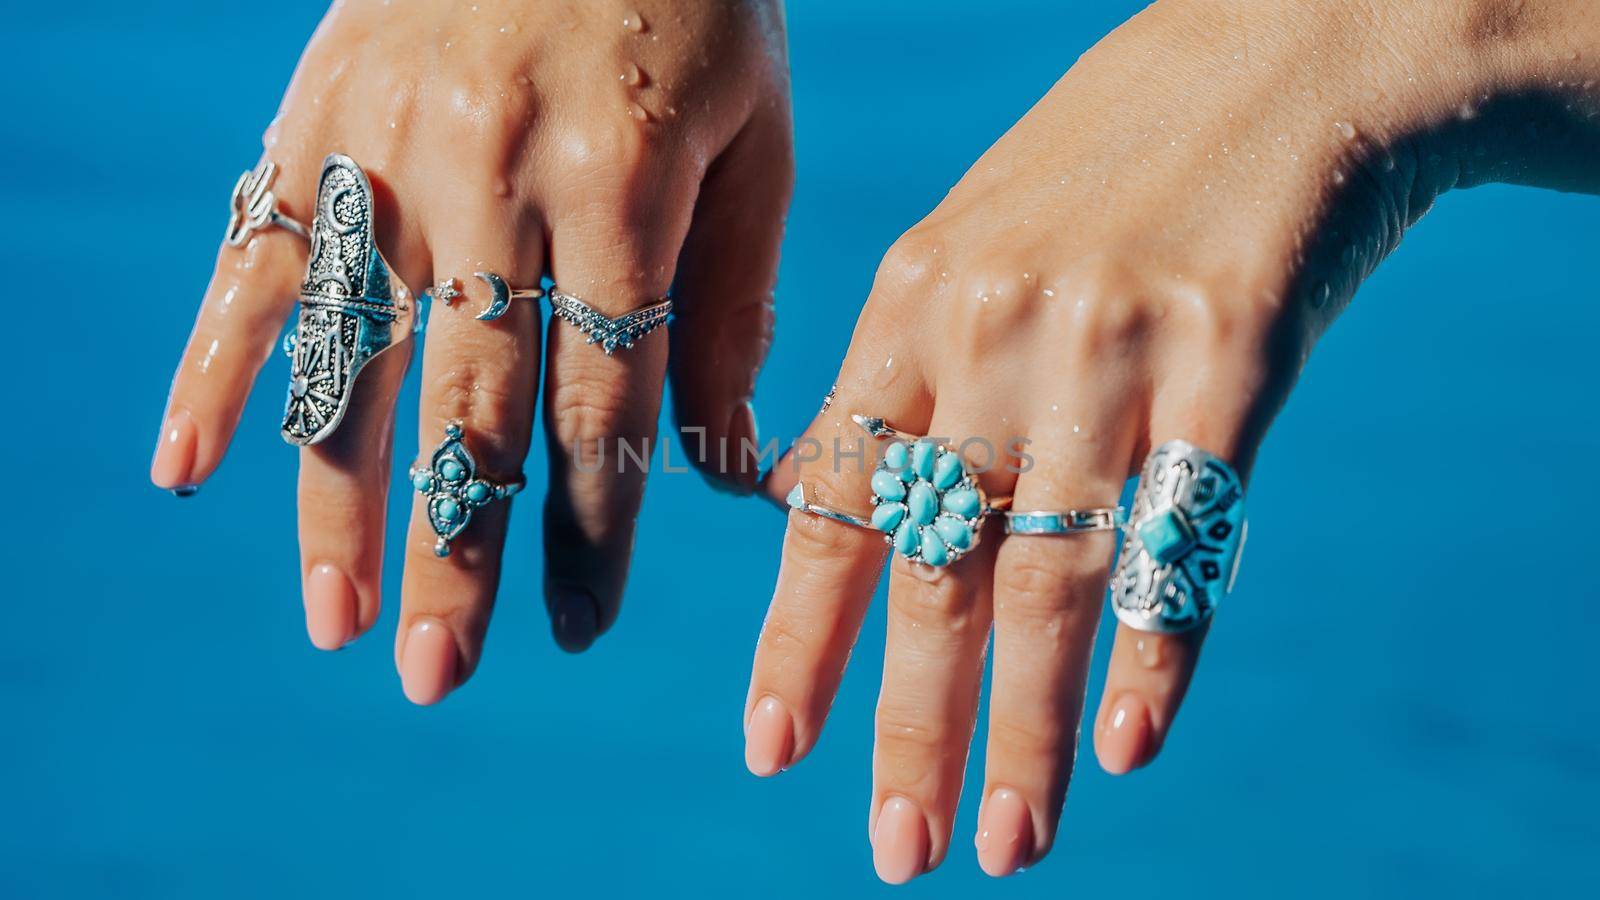 Beautiful gypsy woman demonstrates boho jewelry, rings with turquoise stones on hands. Girl in white dress showing accessories in blue water. Femininity, trend, hippie style concept. by kristina_kokhanova